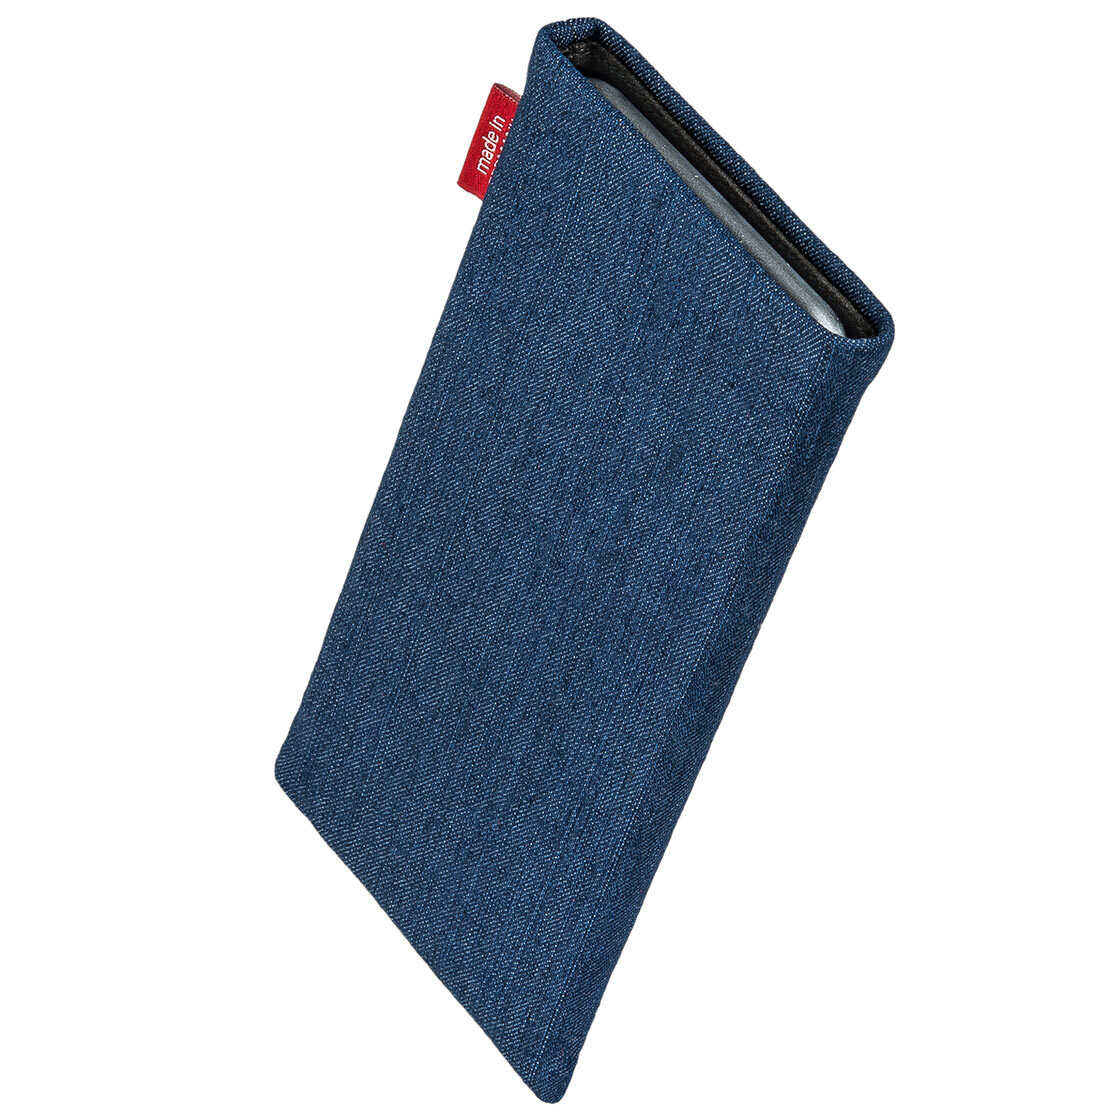 fitBAG Rock in denim - sleeve made of robust fabric, 14,90